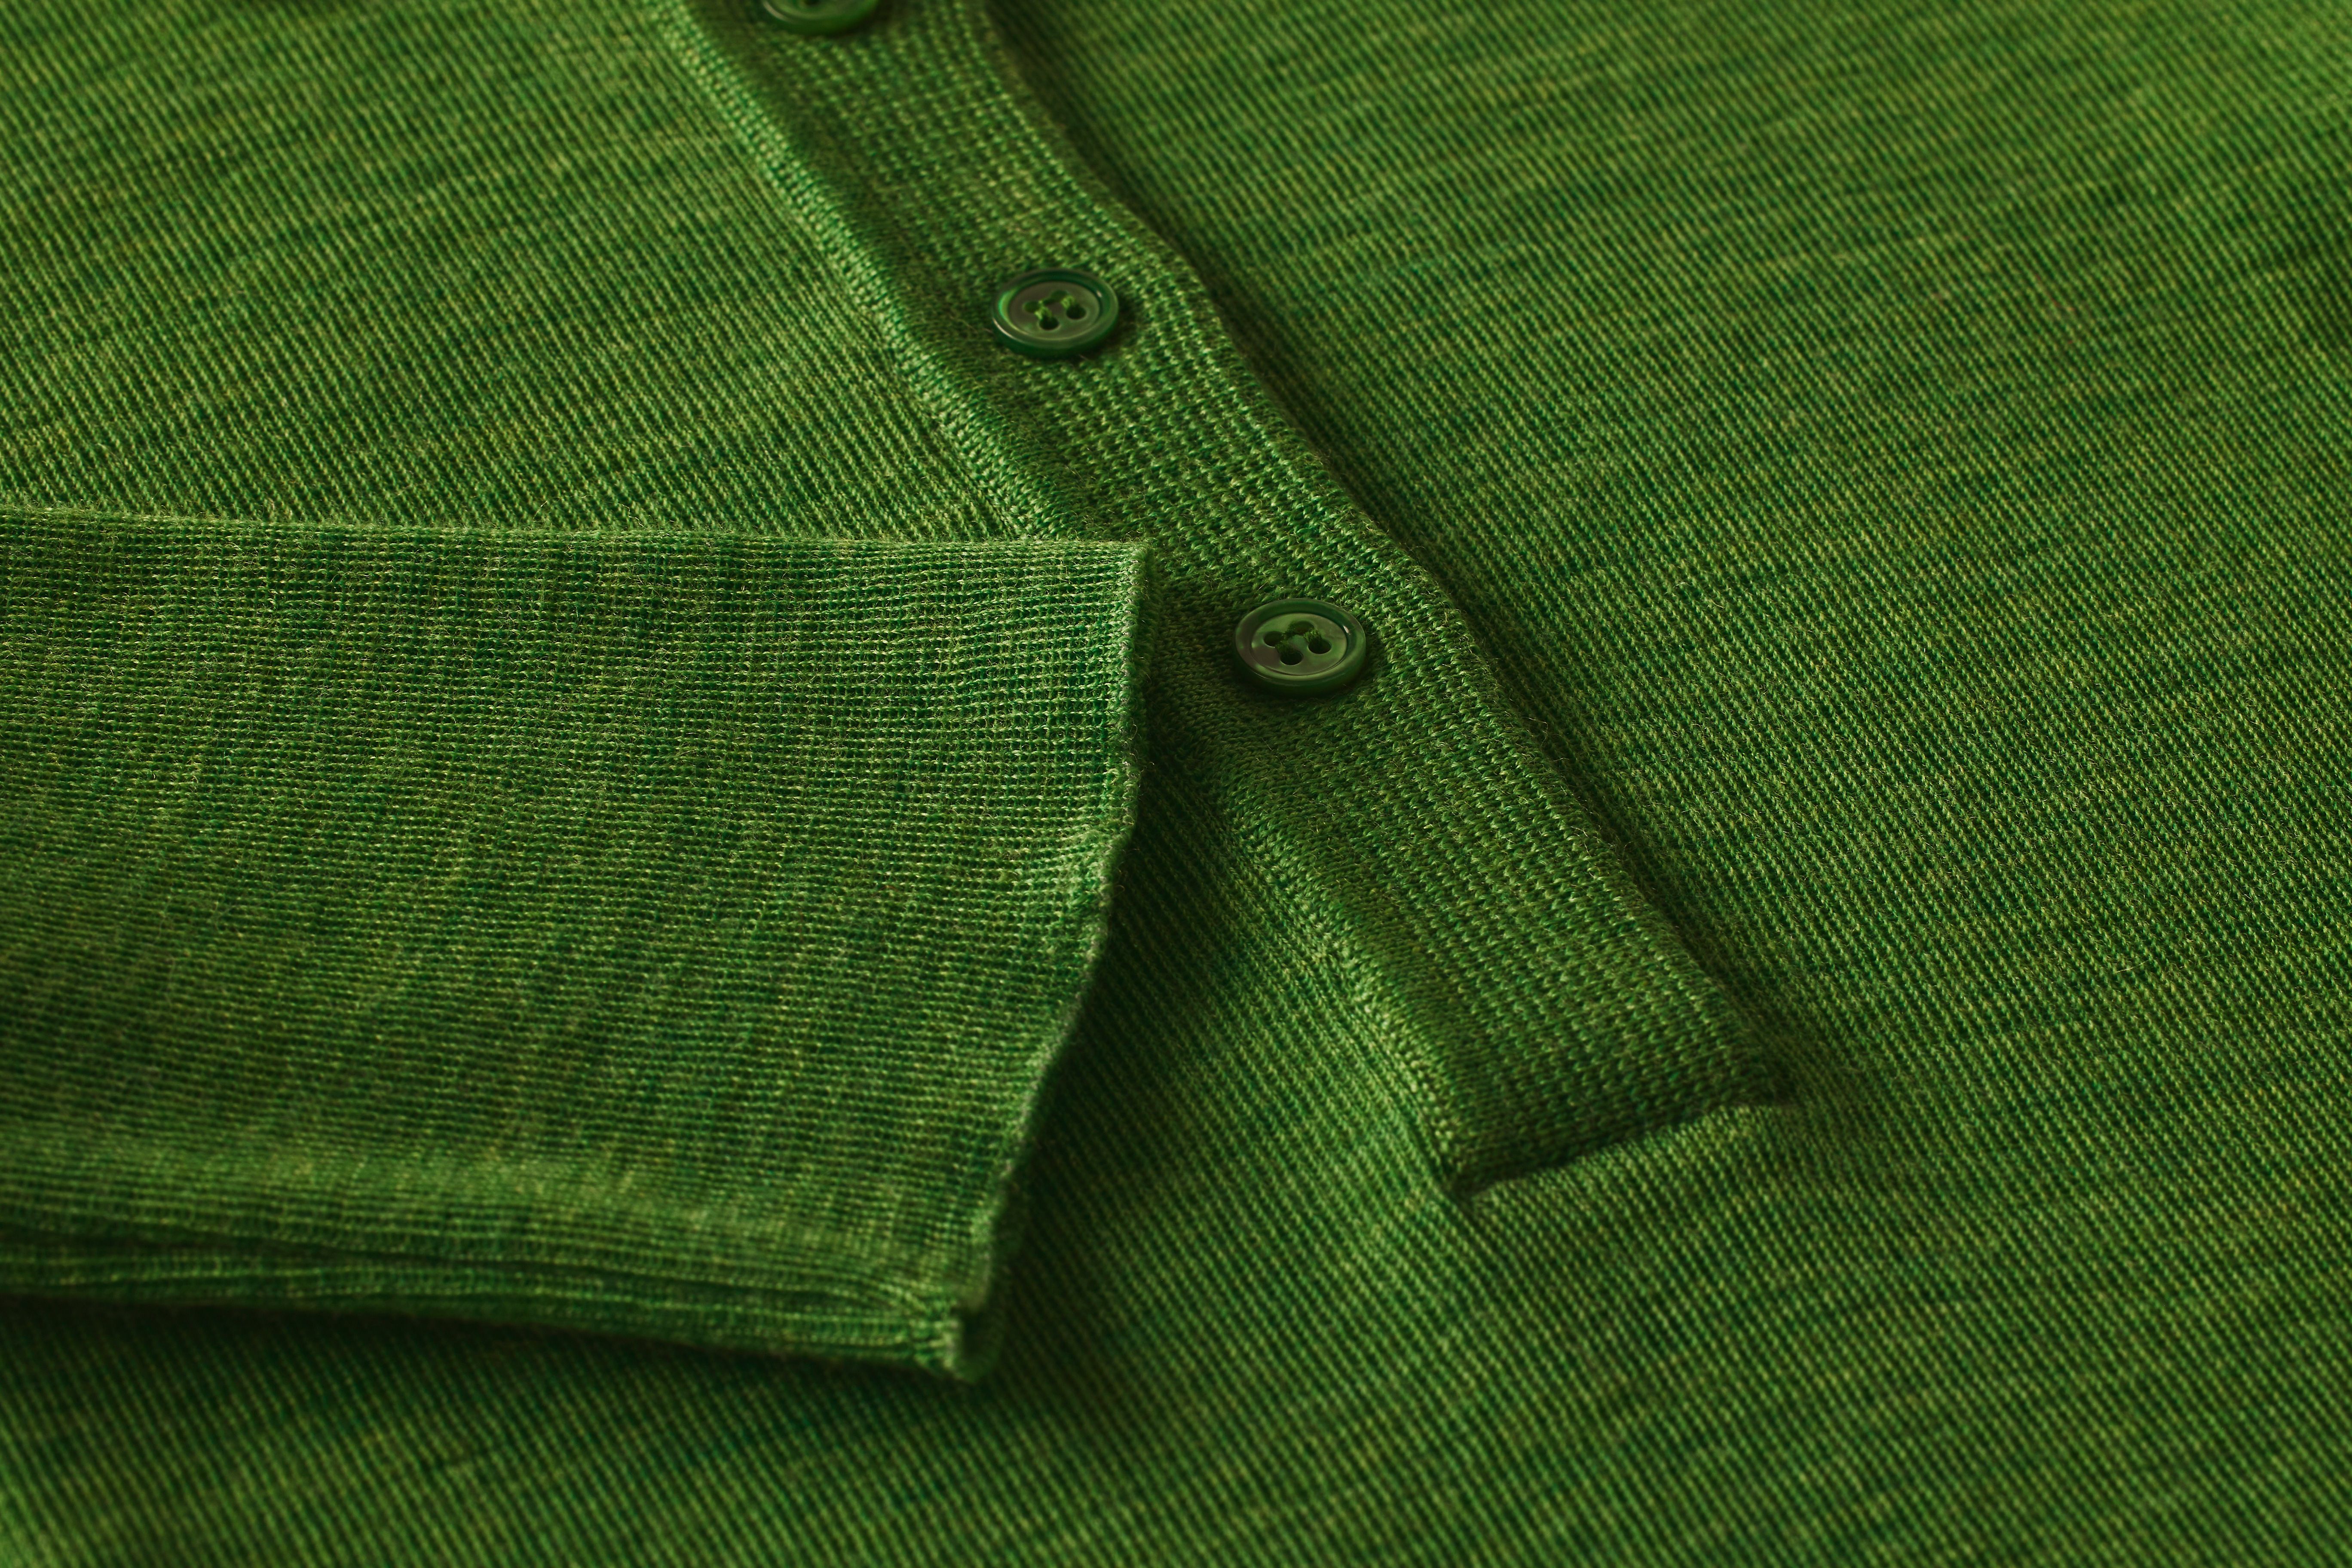 Scanlan Theodore green babywool shirt with close up of texture detail of cuff and buttons